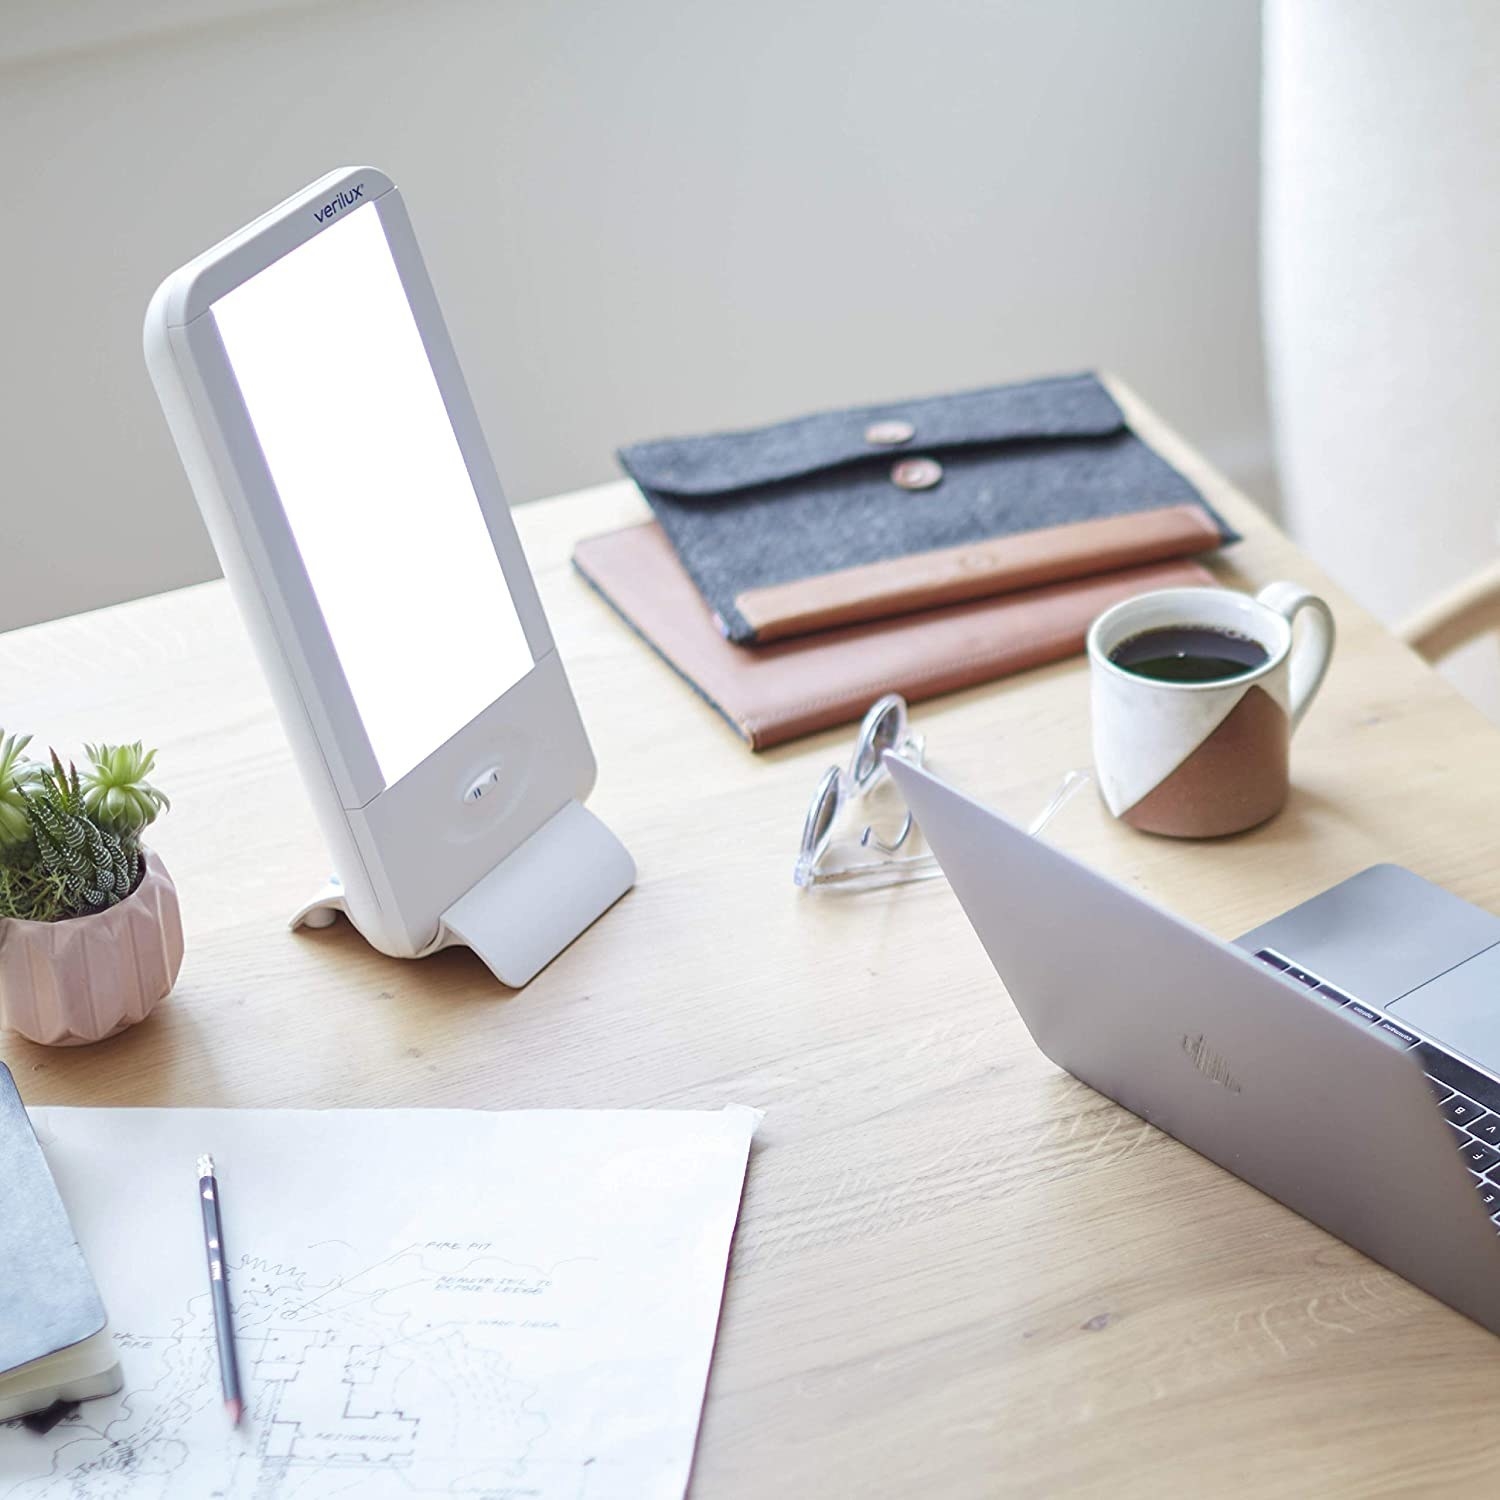 A light therapy lamp sits on a wooden desk, amidst various office paraphernaelia (a sketch, a mug of coffee, an open laptop, a laptop sleeve, a potted plant, a pair of sunglasses)